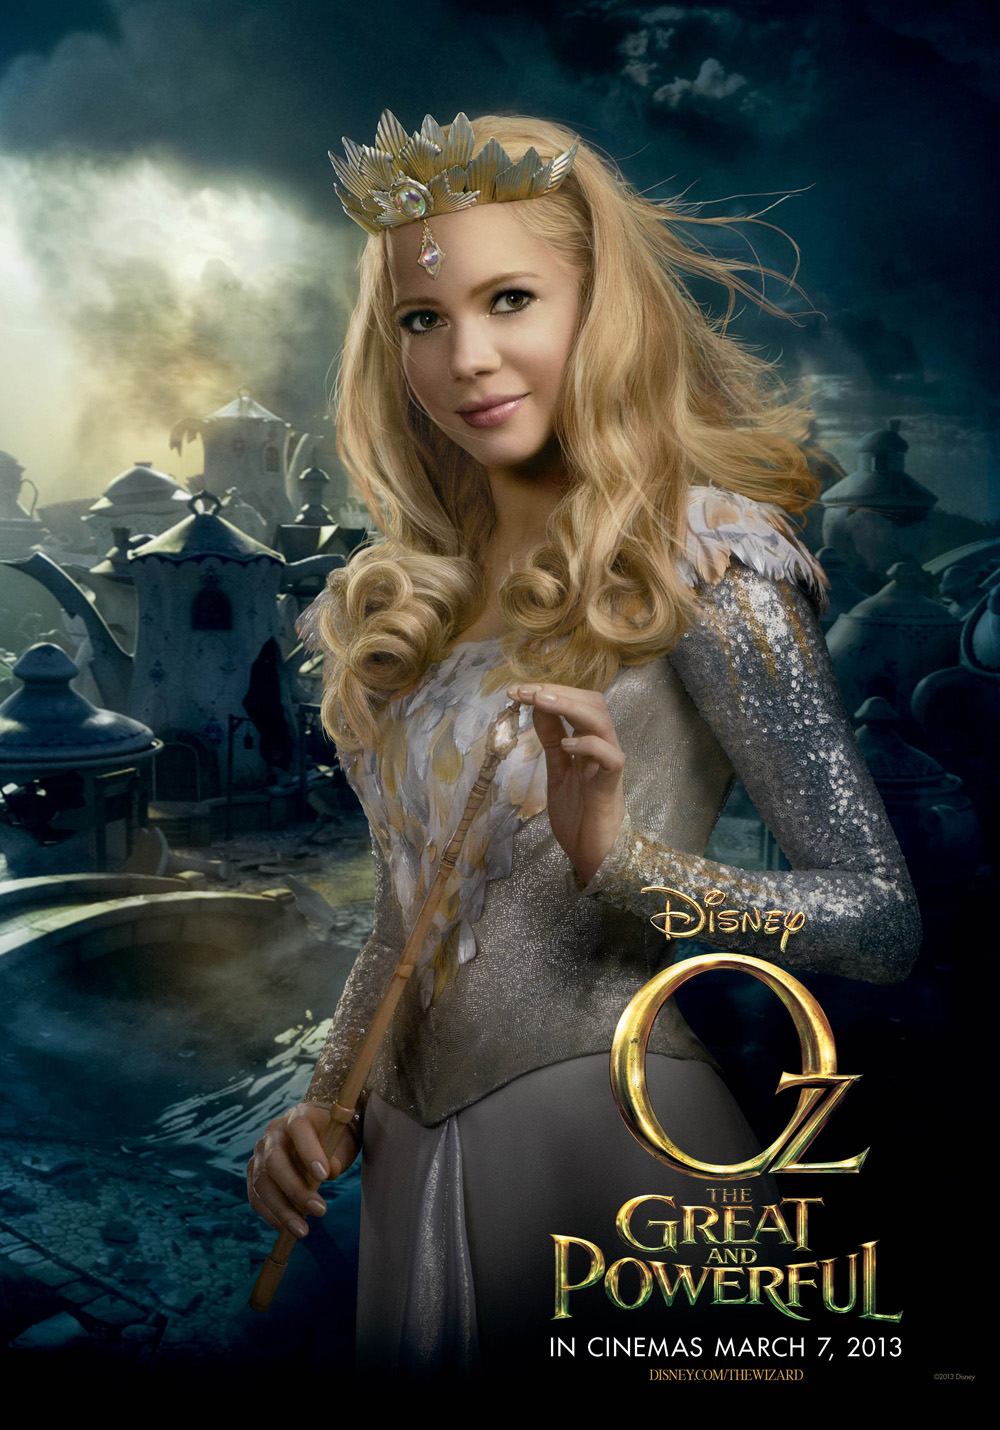 Oz the Great and Powerful - Movie Poster #9 (Original)